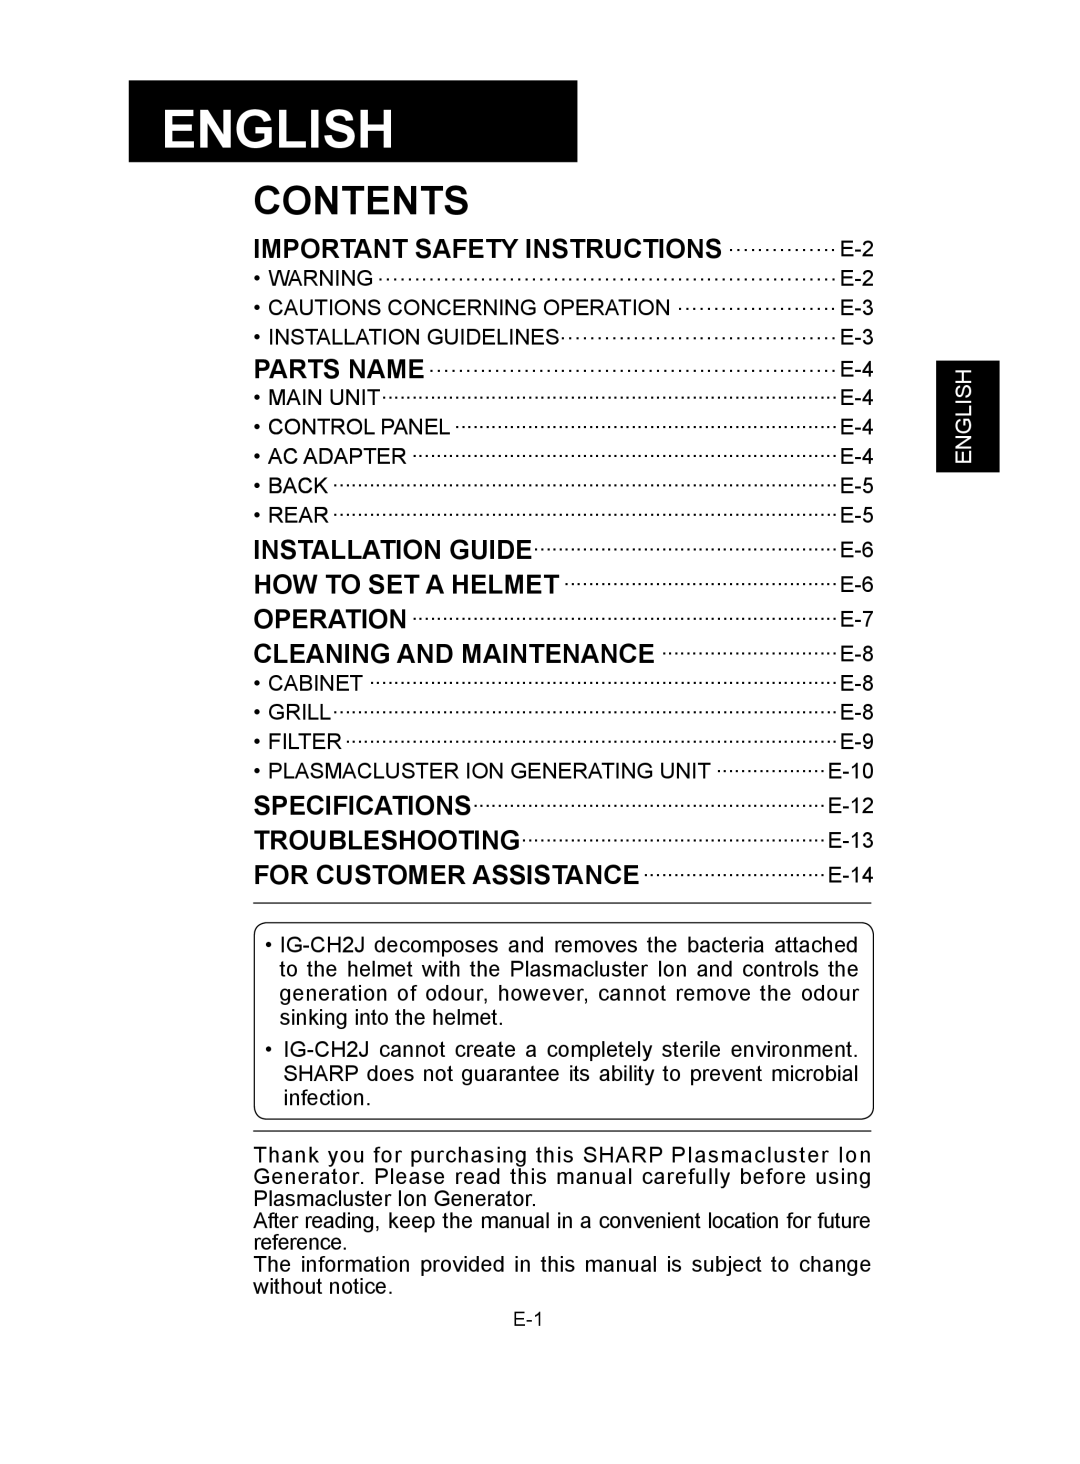 Sharp IG-CH2J operation manual IMPORTANT SAFETY INSTRUCTIONS................E-2, English, Contents 